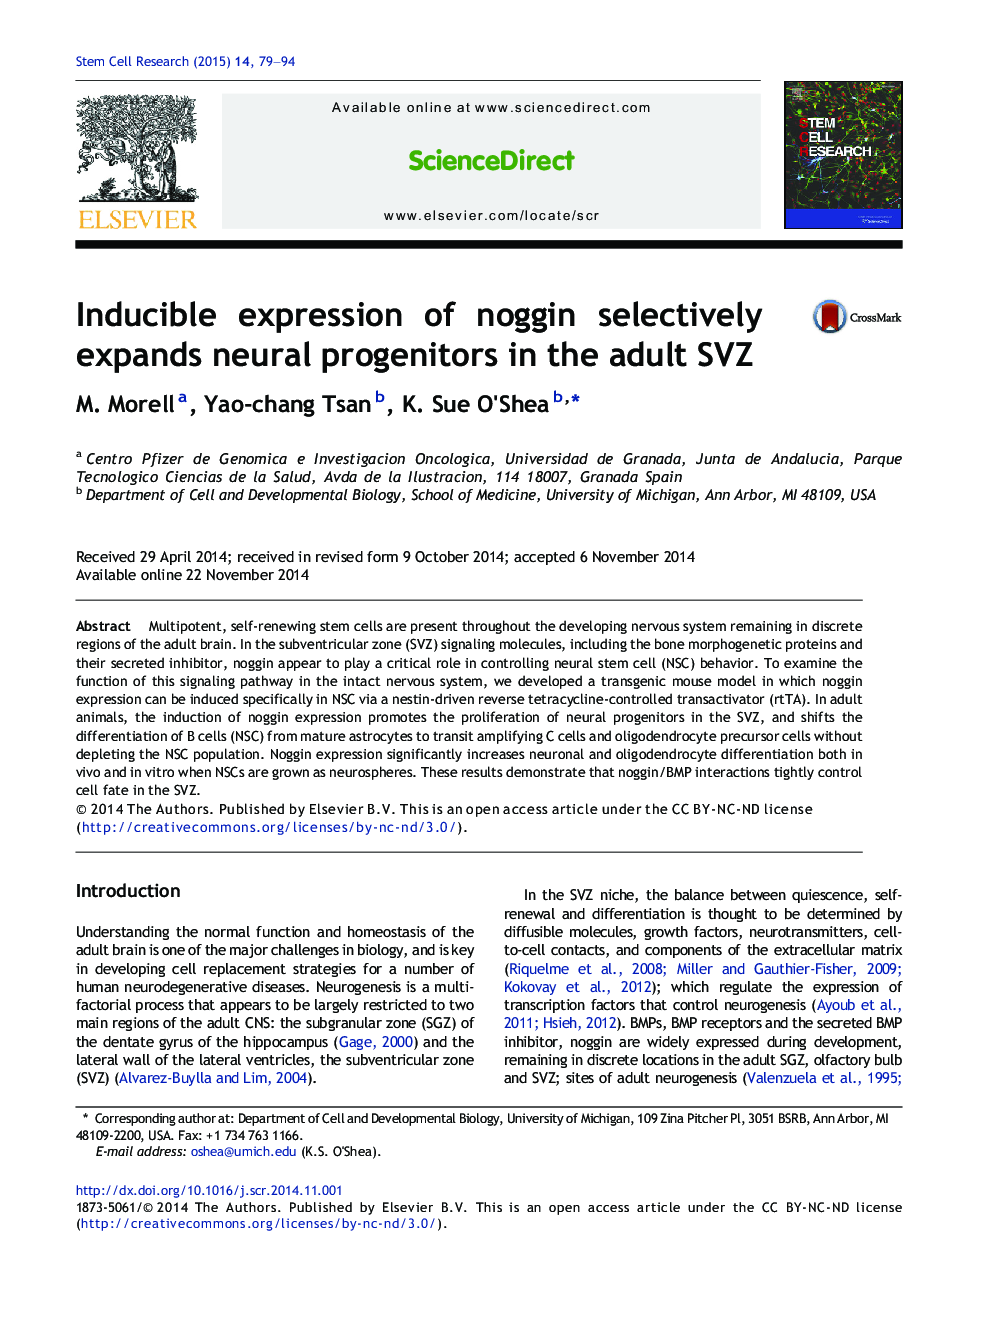 Inducible expression of noggin selectively expands neural progenitors in the adult SVZ